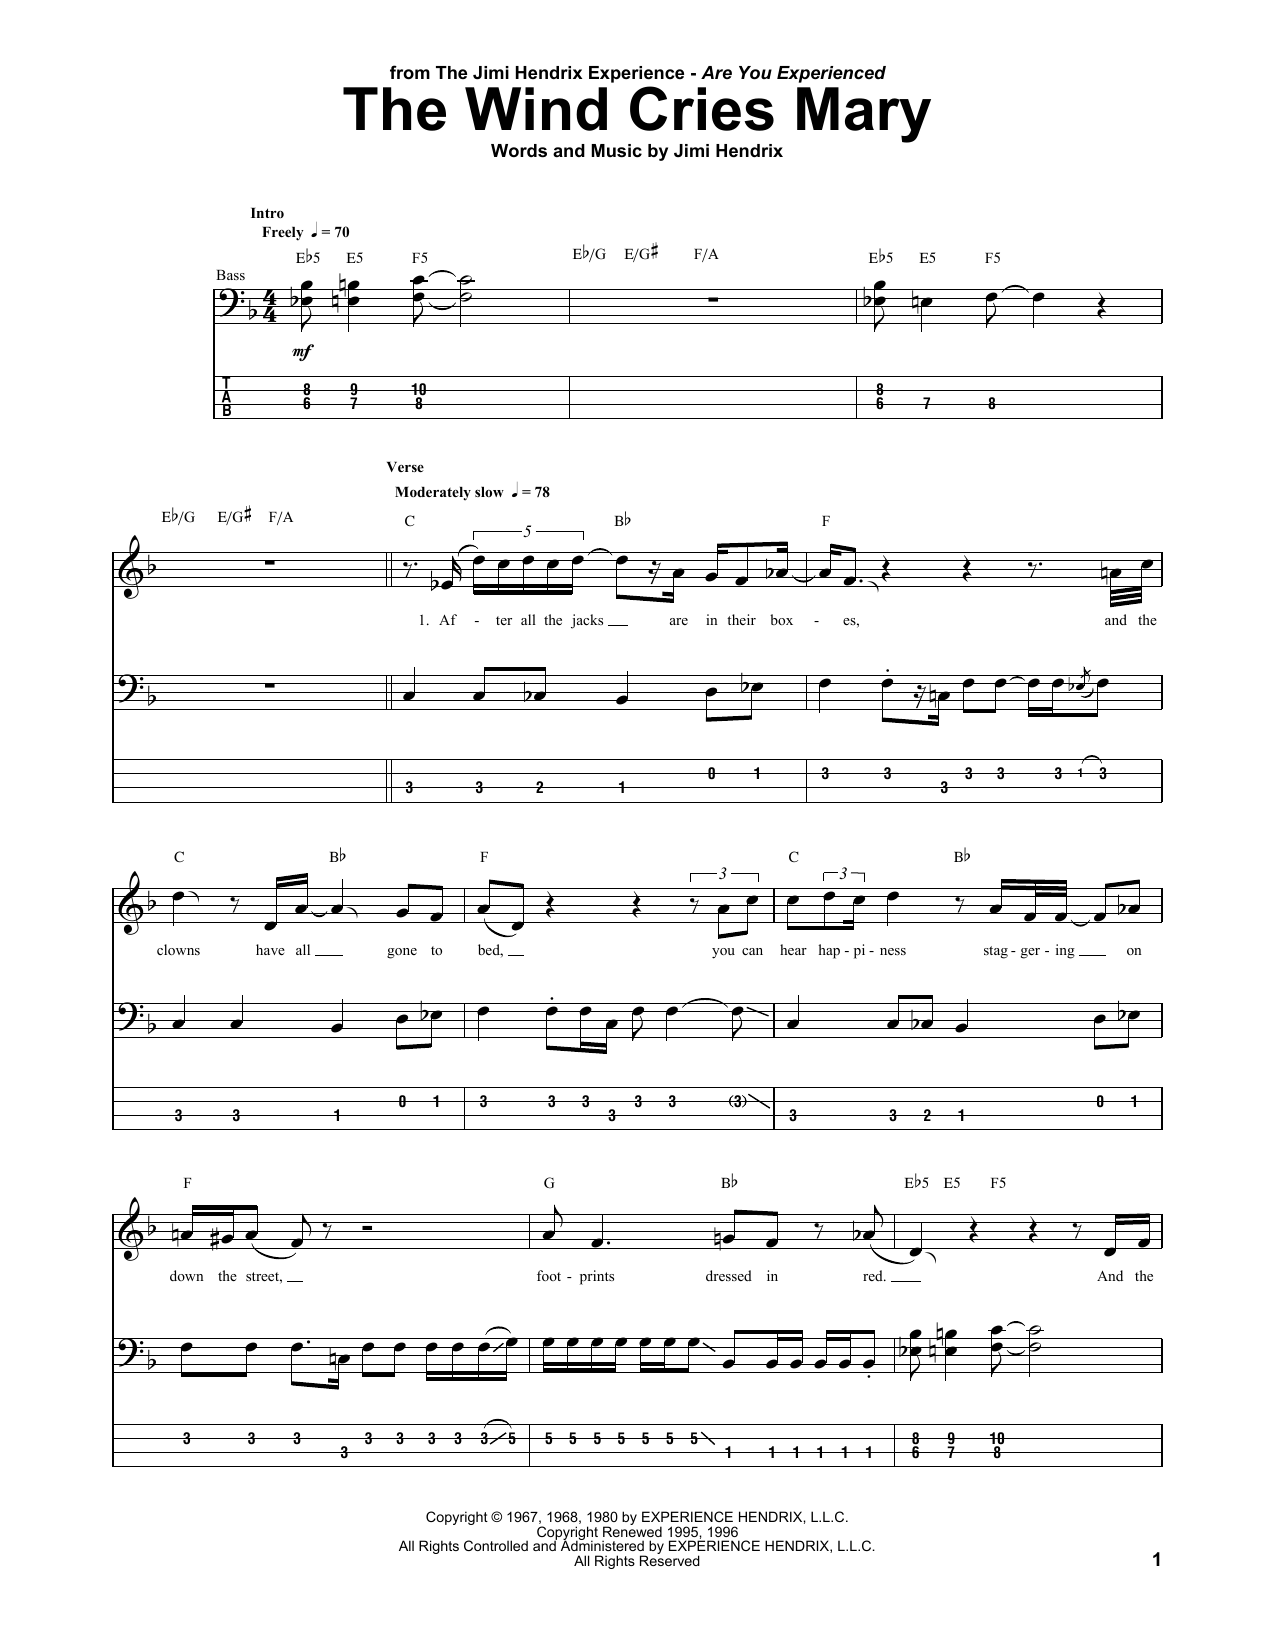 Download Jimi Hendrix The Wind Cries Mary Sheet Music